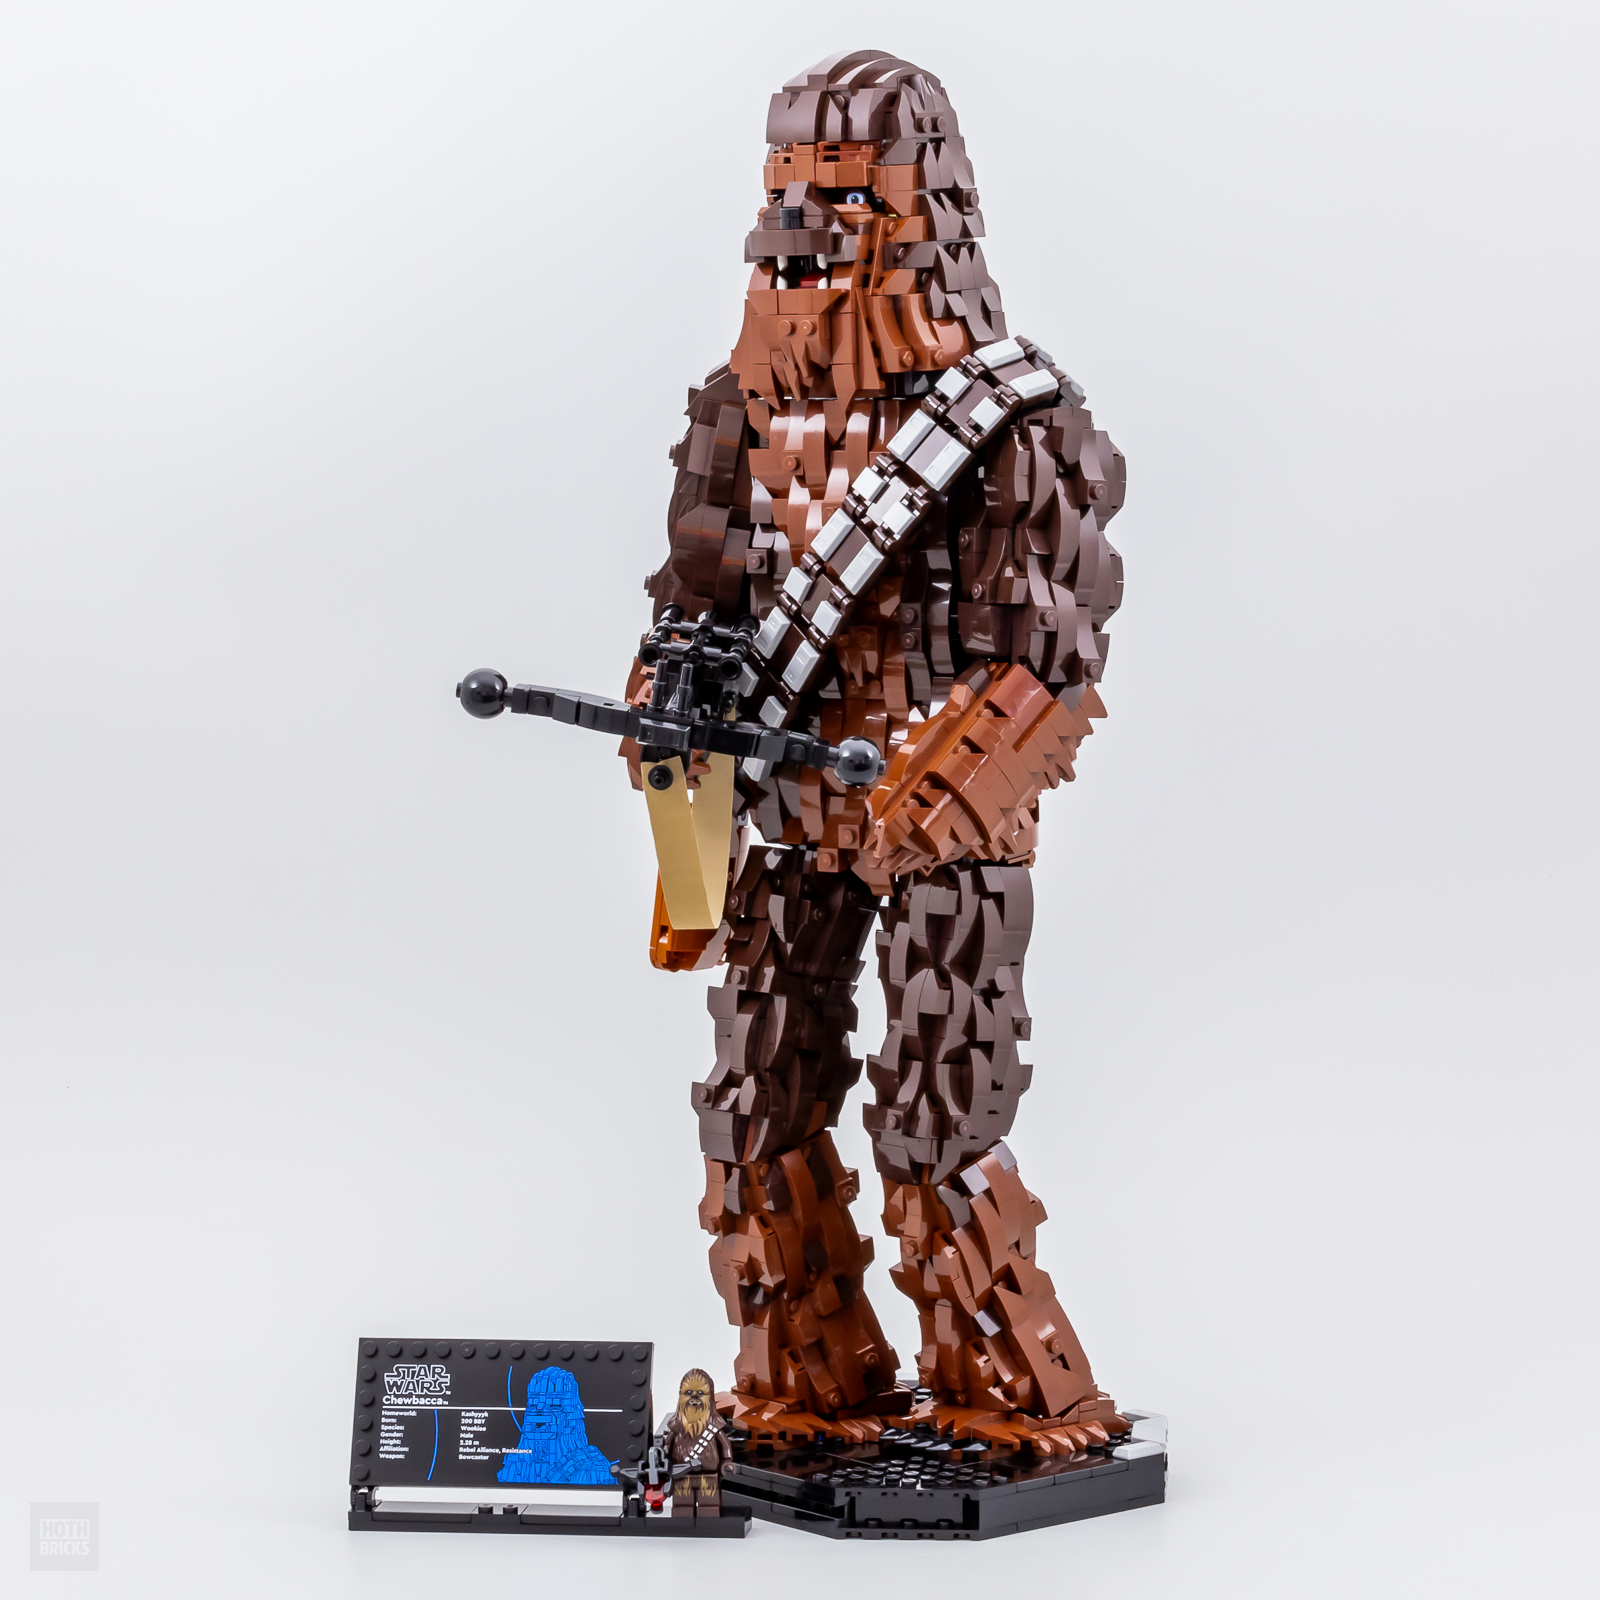 ▷ LEGO Reviews at Hothbricks - Independent Testing of LEGO Products